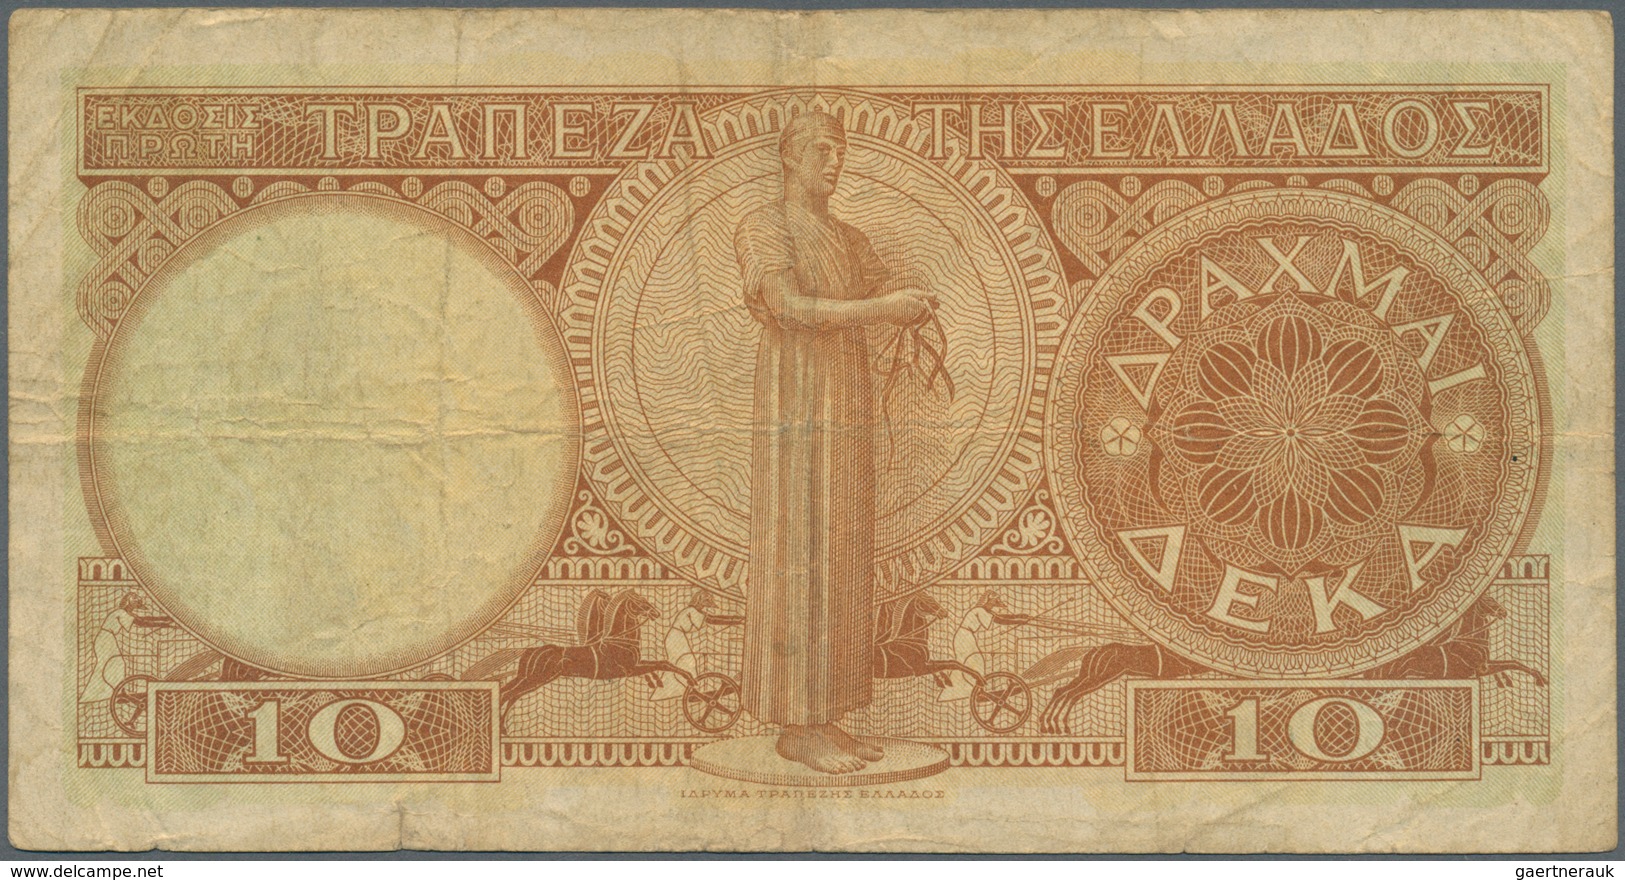 01643 Greece / Griechenland: 10 Drachmai 1954 P. 186a, Used With Several Folds, Stained Paper, Small Pen W - Griekenland